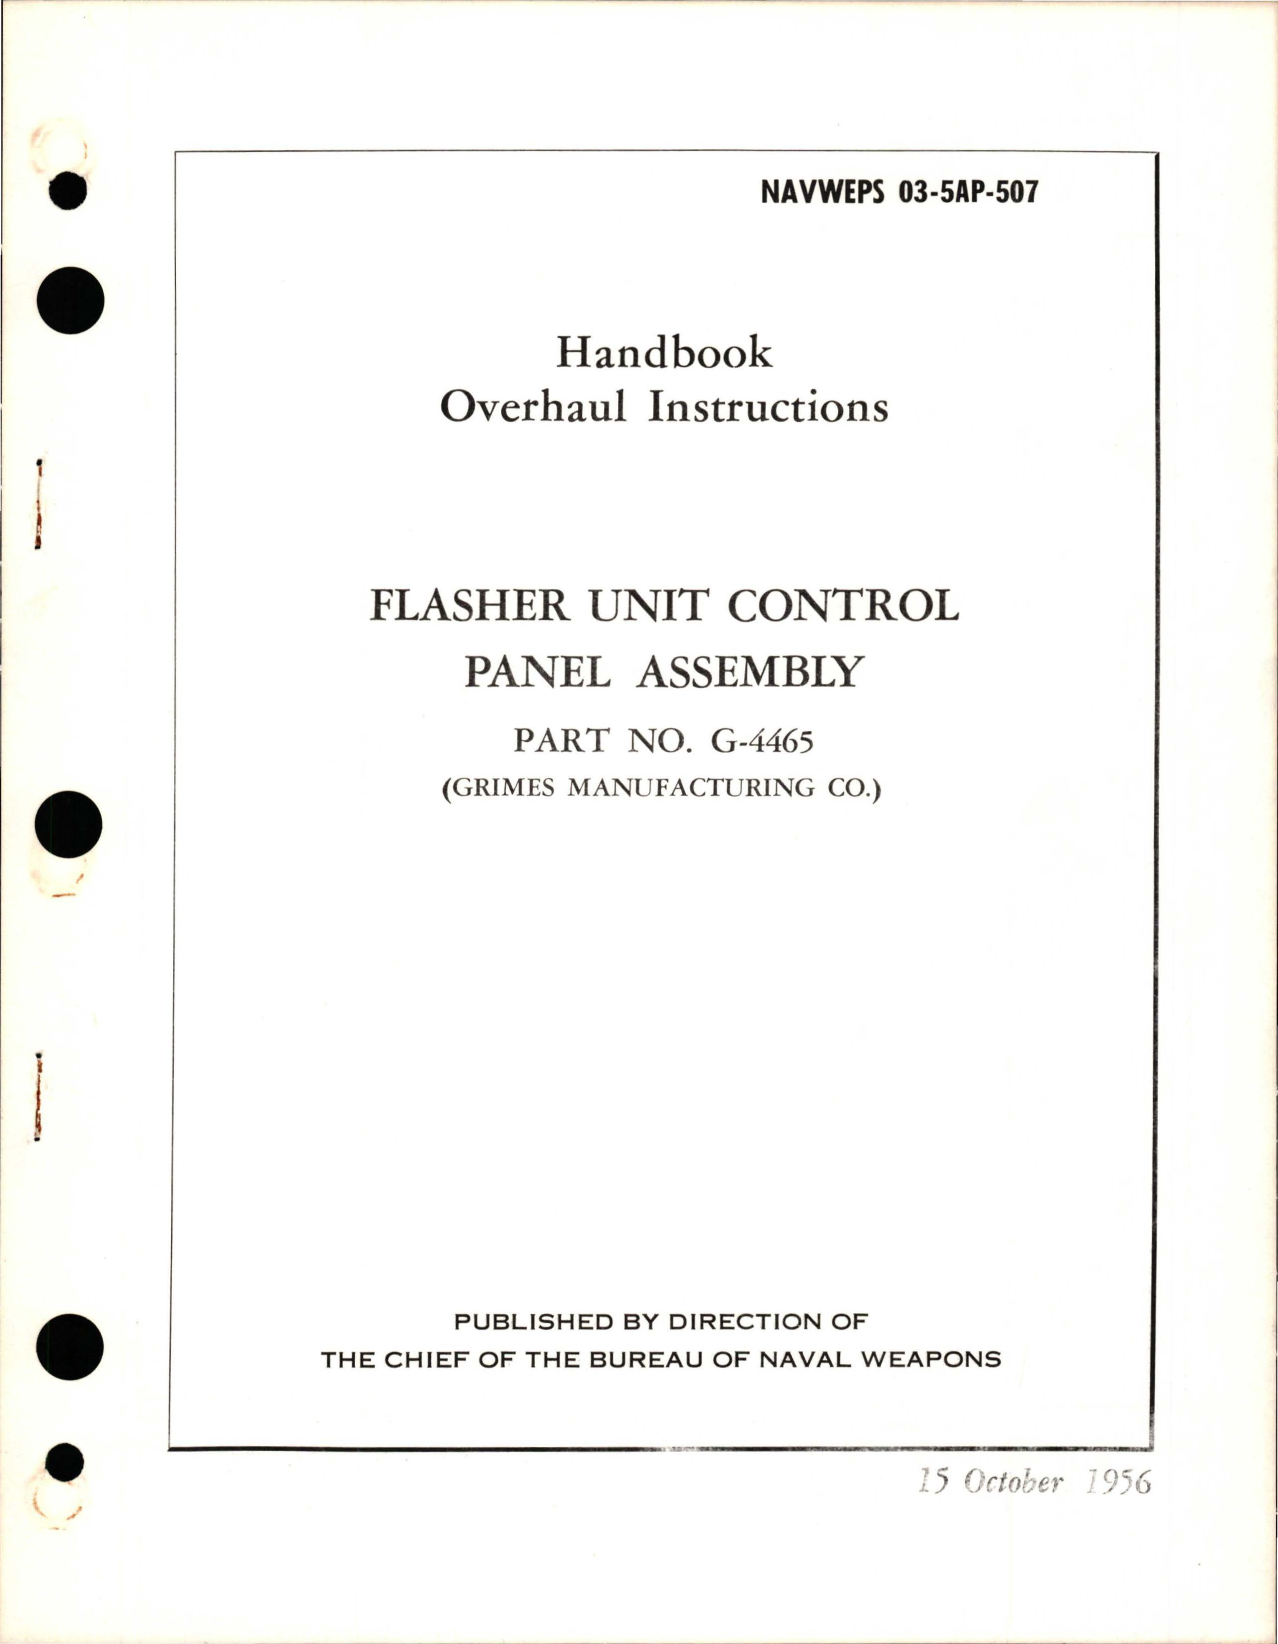 Sample page 1 from AirCorps Library document: Overhaul Instructions for Flasher Unit Control Panel Assembly - Part G-4465